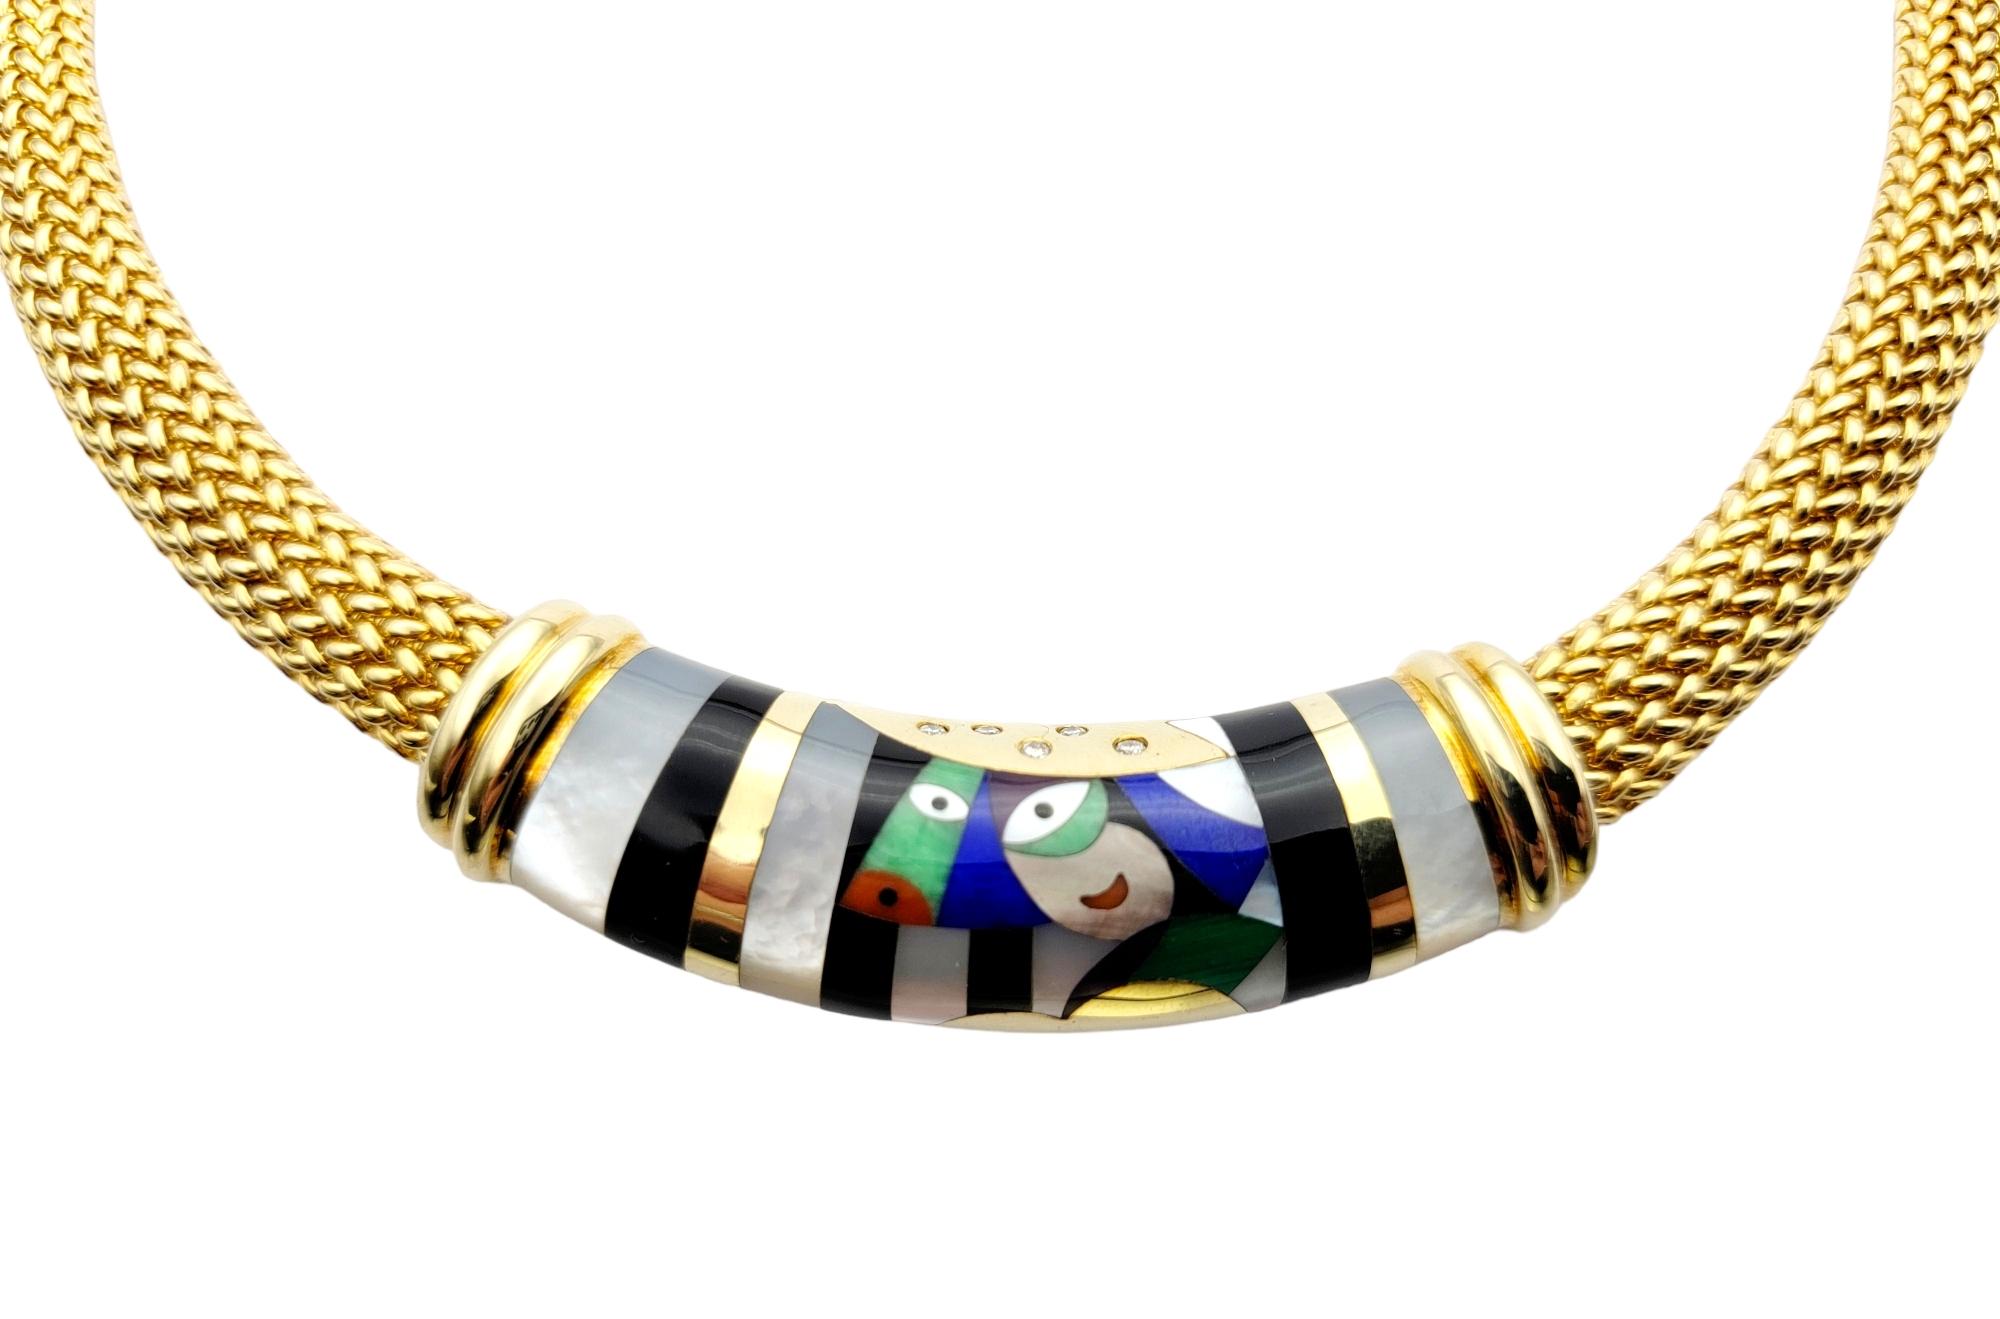 Adorn your neck in vibrant modern art! This gorgeous diamond and gemstone mosaic necklace from esteemed jewelry designer, Asch Grossbardt is sure to make a bold statement.  Asch Grossbart jewelry is known for exquisite color combinations, as well as